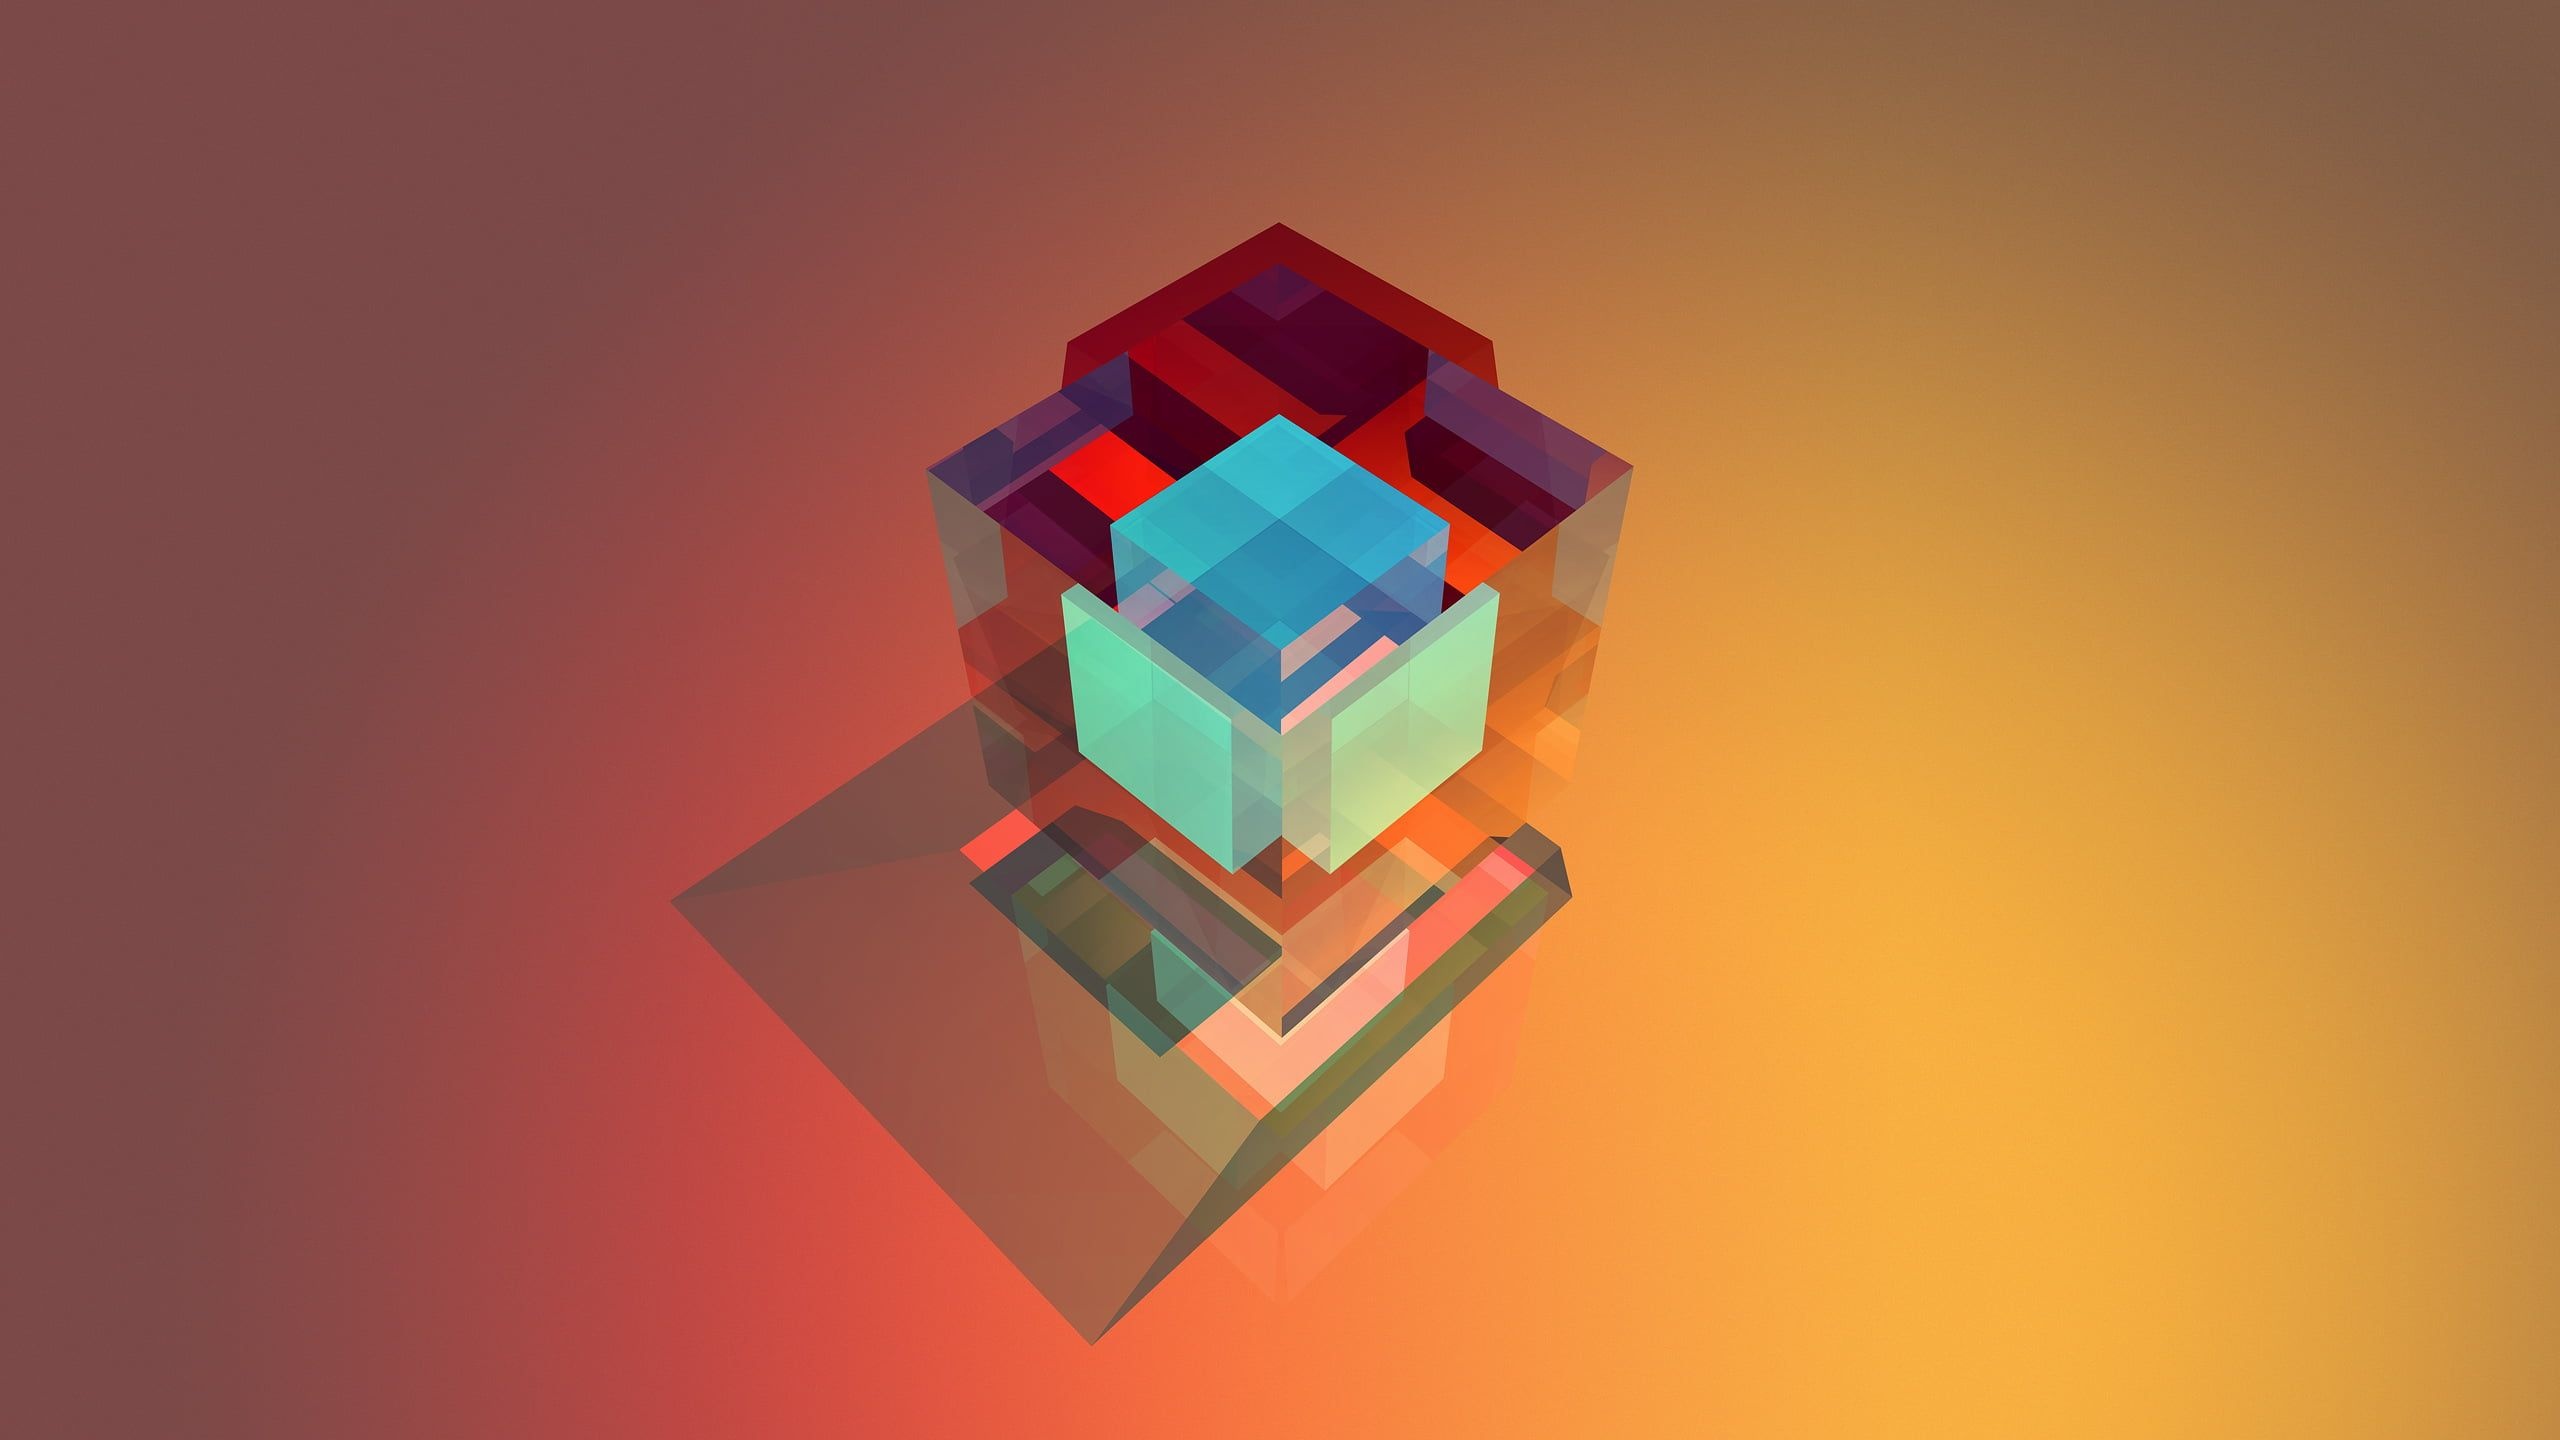 Multicolored Cube, Colorful geometry, Abstract composition, Vivid hues, Playful design, 2560x1440 HD Desktop